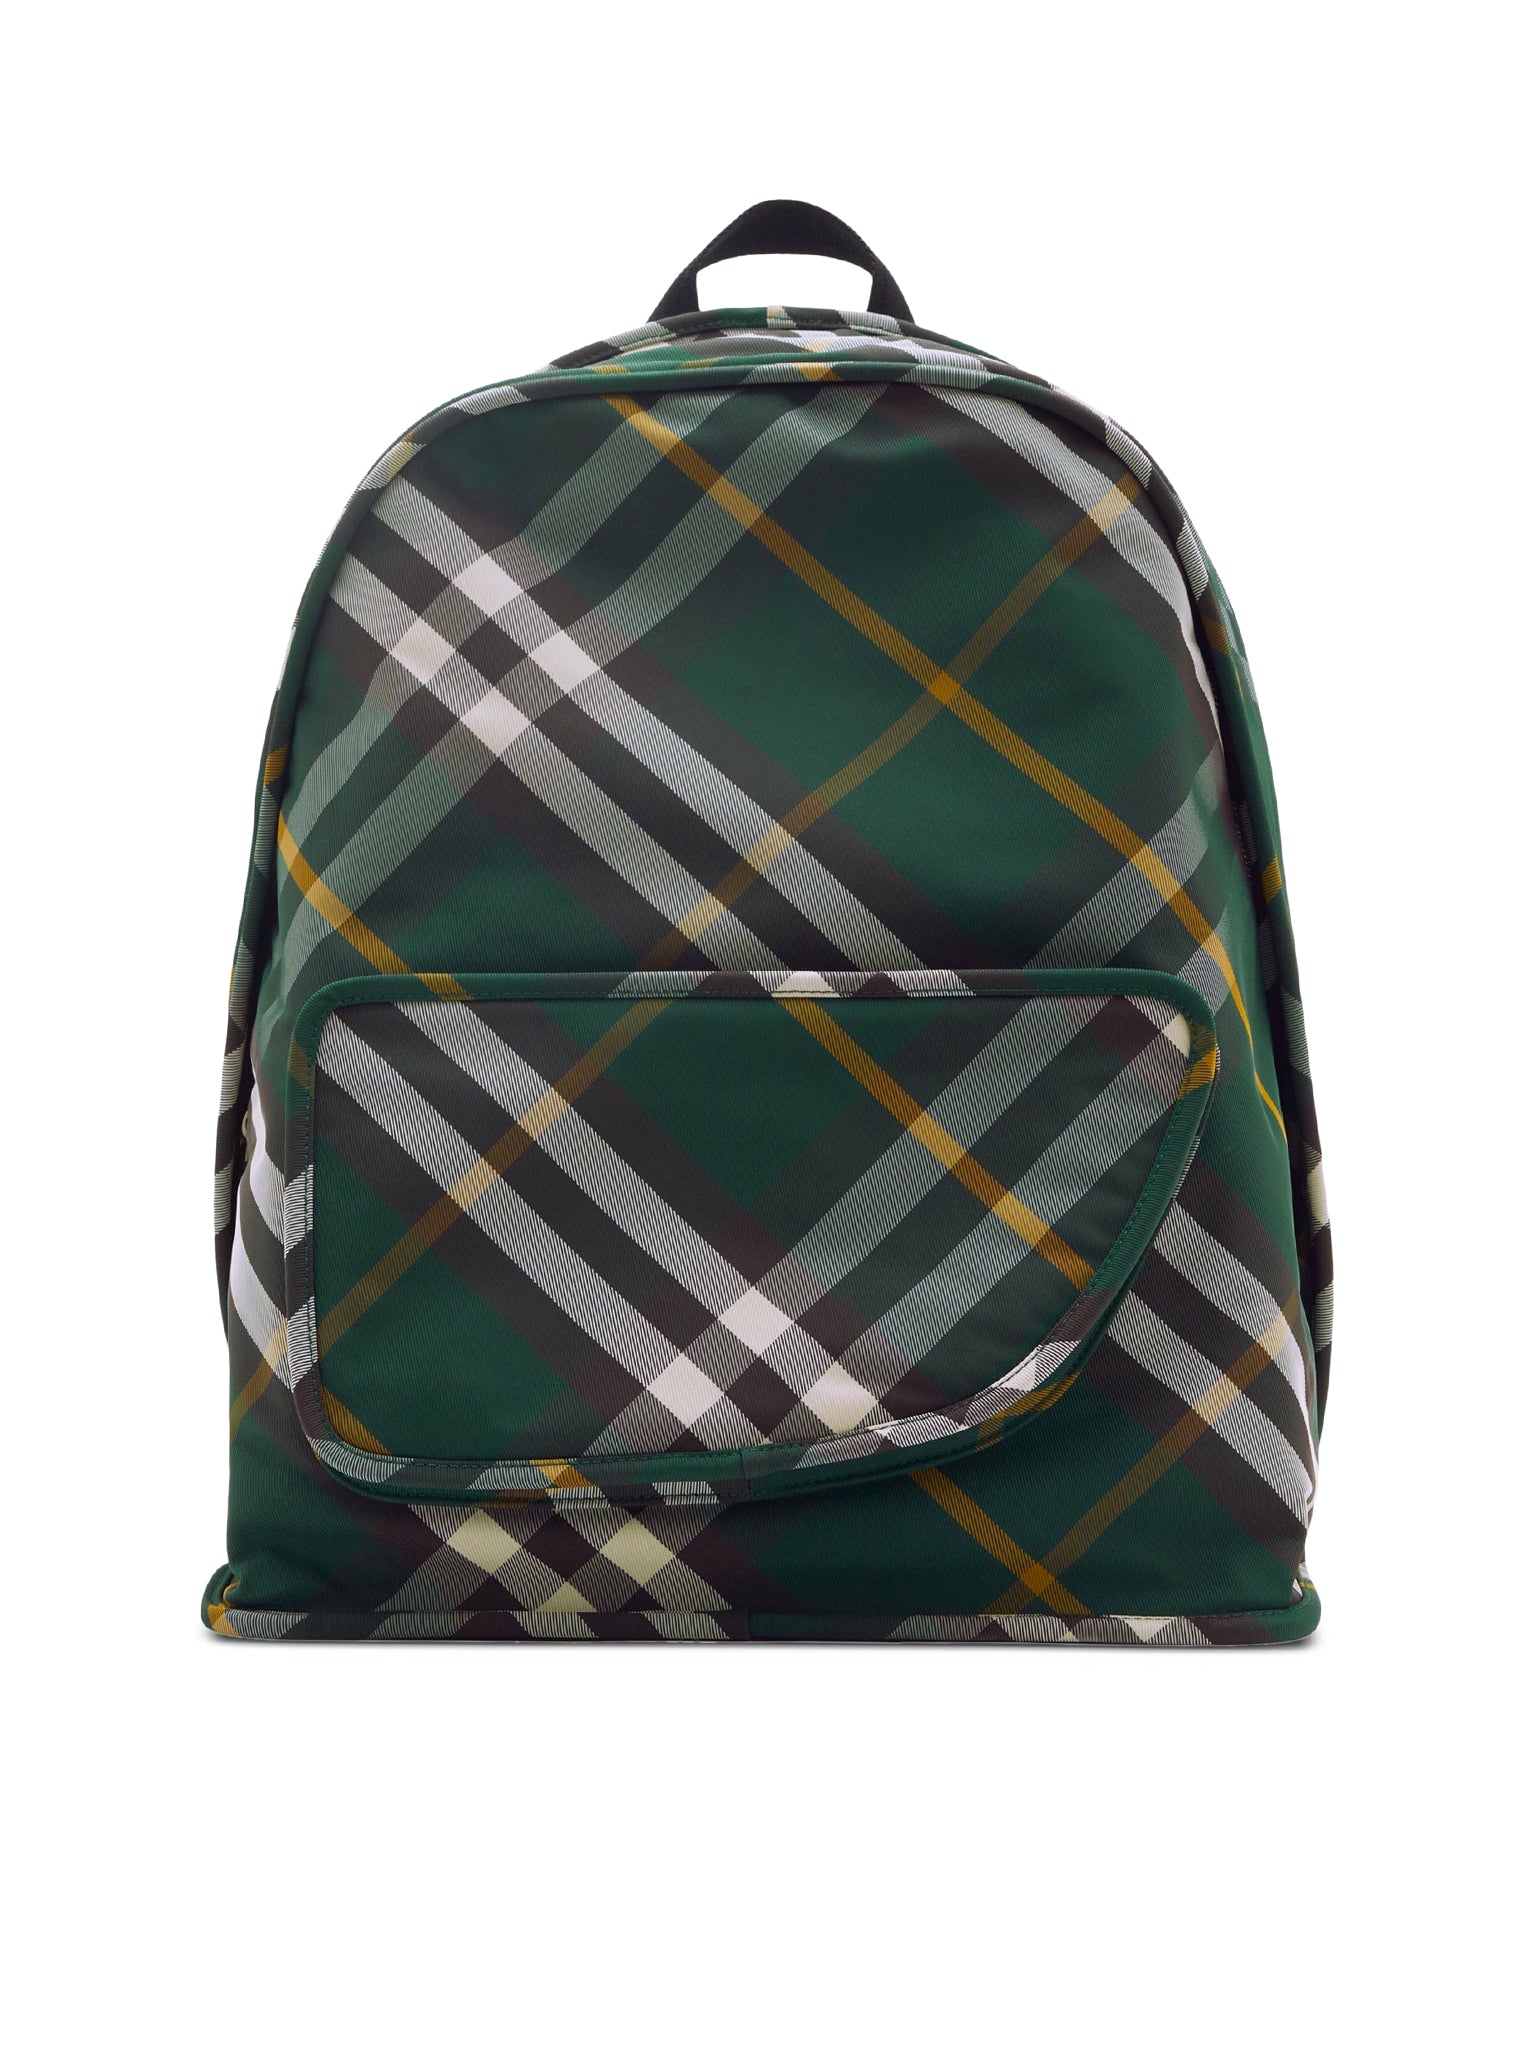 Shield checked backpack